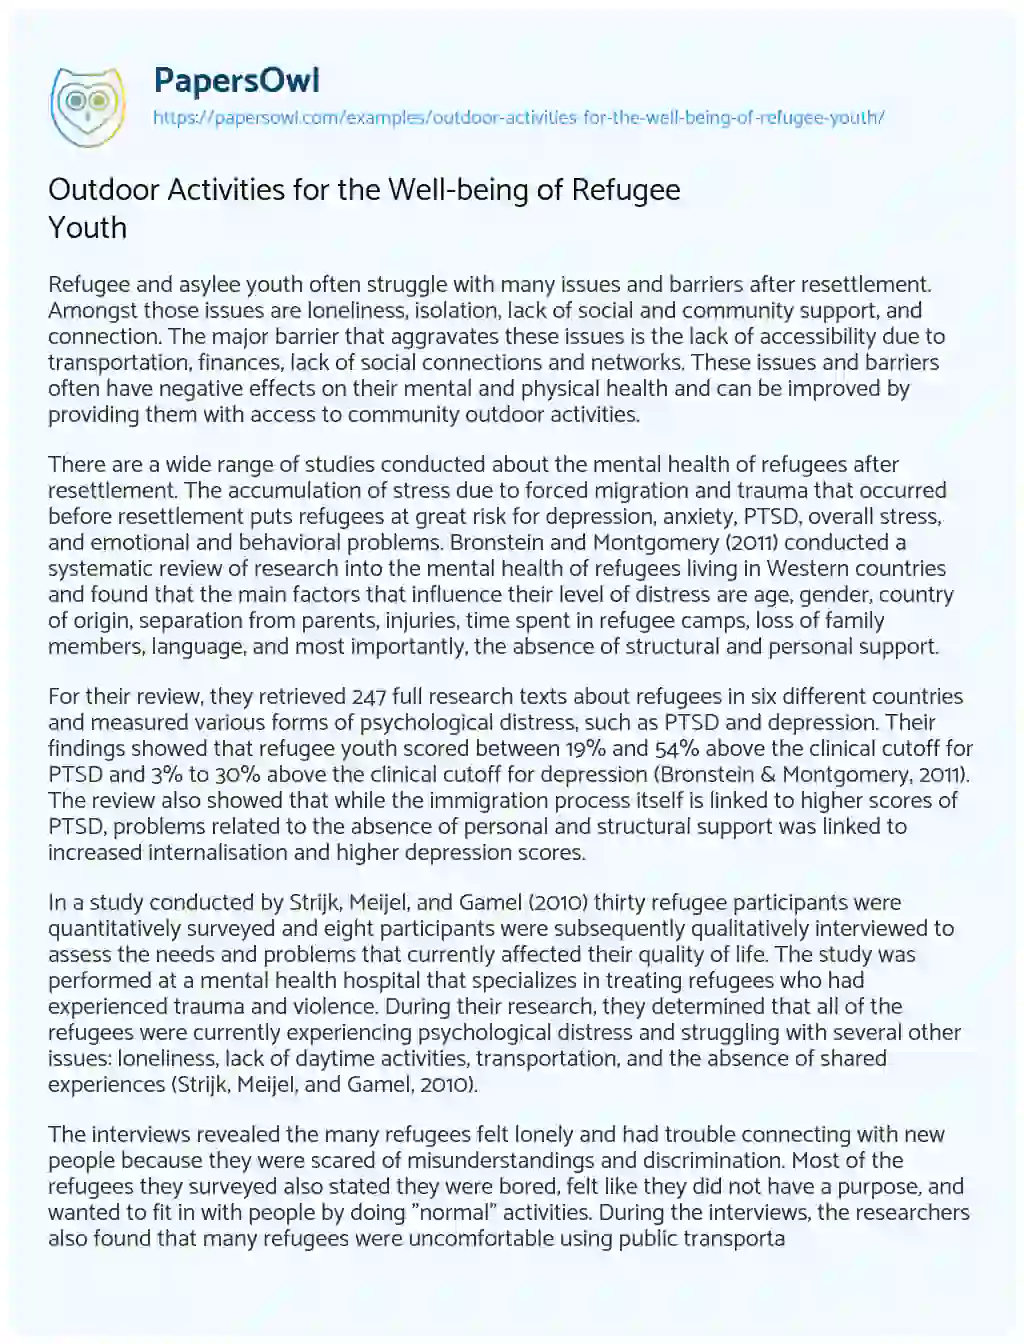 Essay on Outdoor Activities for the Well-being of Refugee Youth